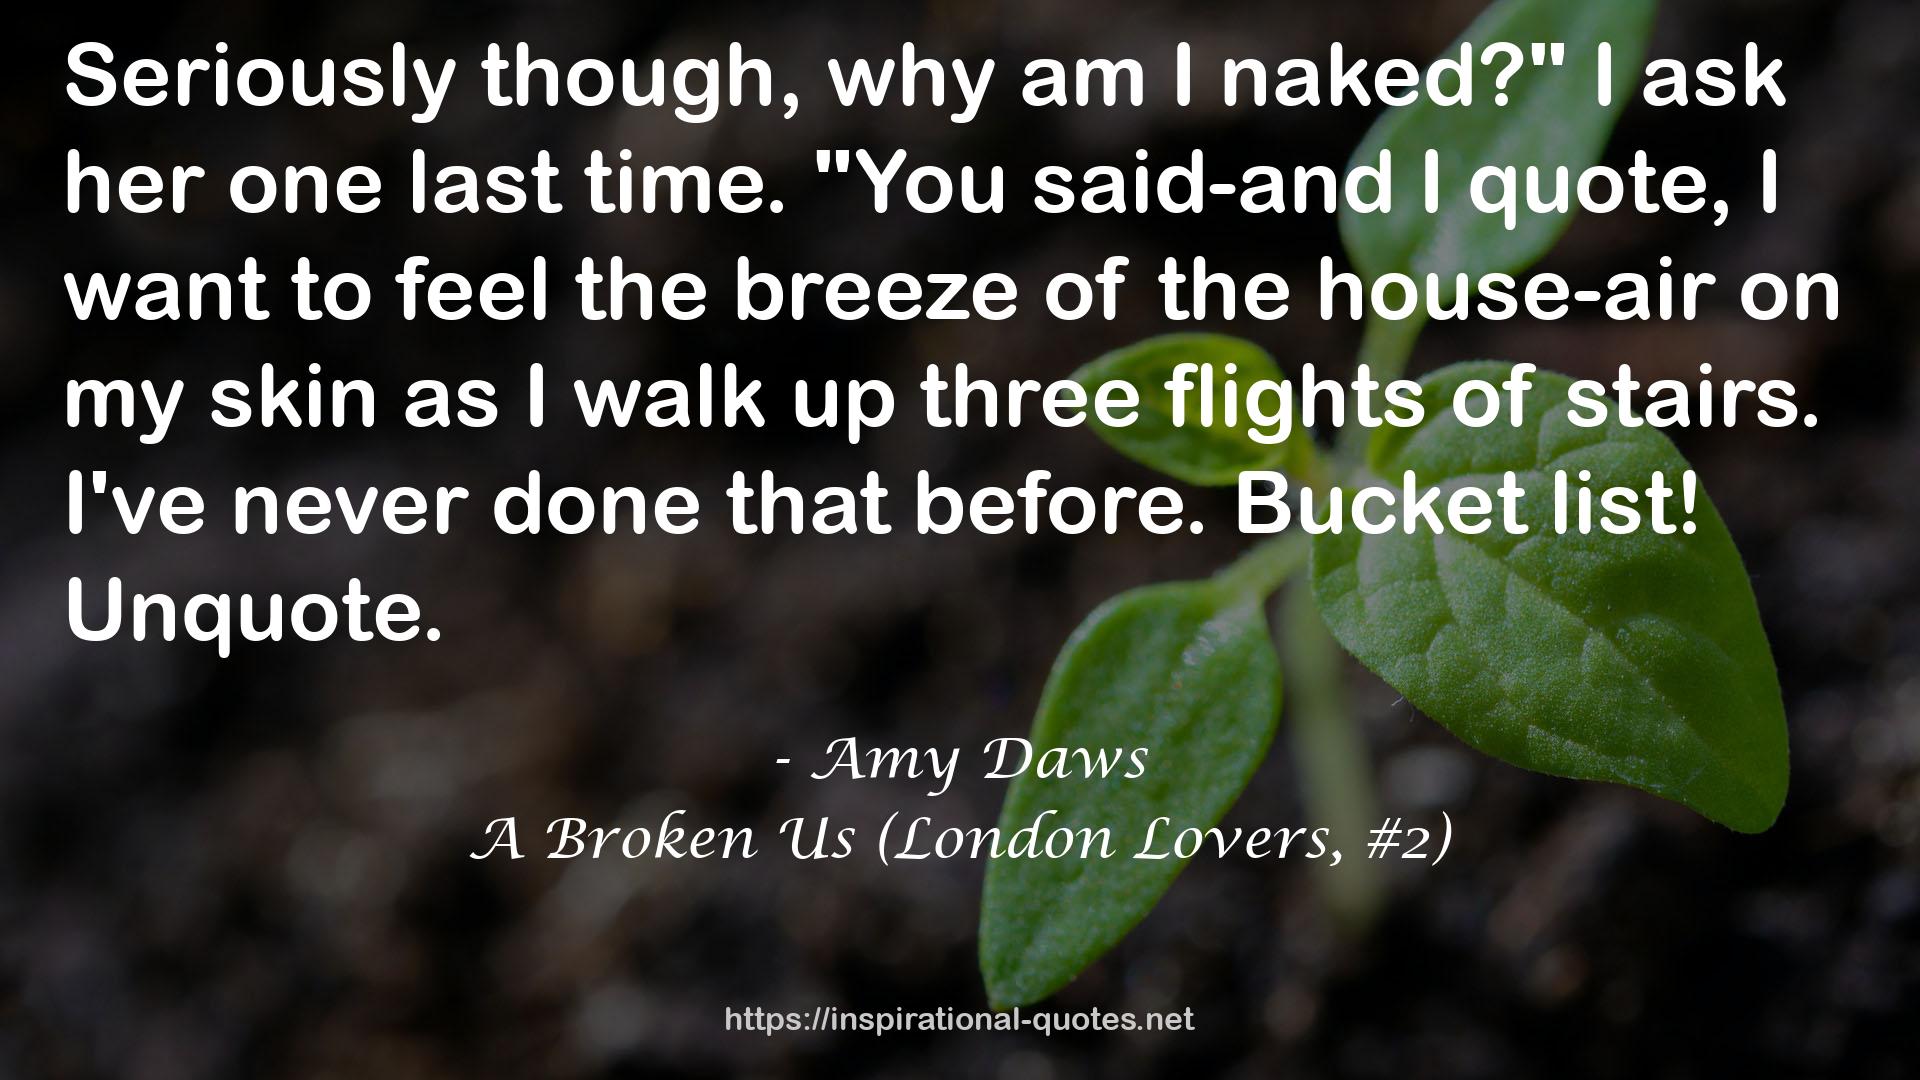 A Broken Us (London Lovers, #2) QUOTES